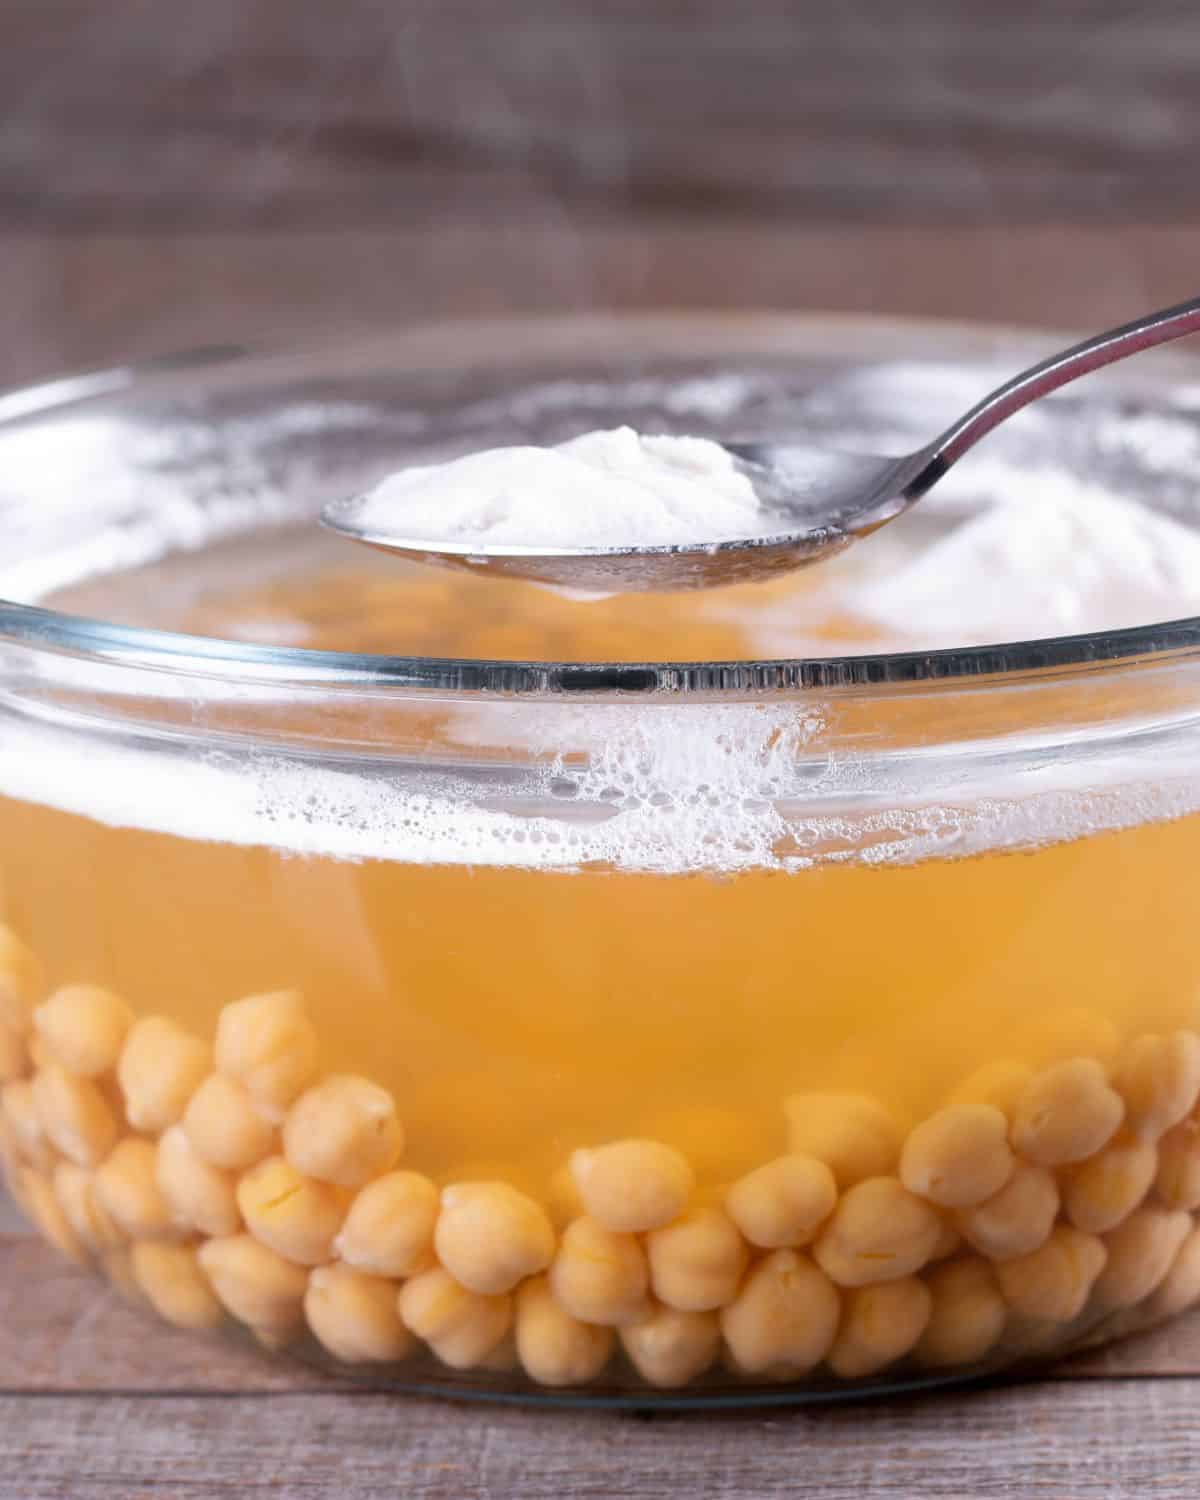 Glass bowl of chickpeas and chickpea liquid to show what Aquafaba is. The image is for a recipe post on how to use aquafaba in place of eggs.